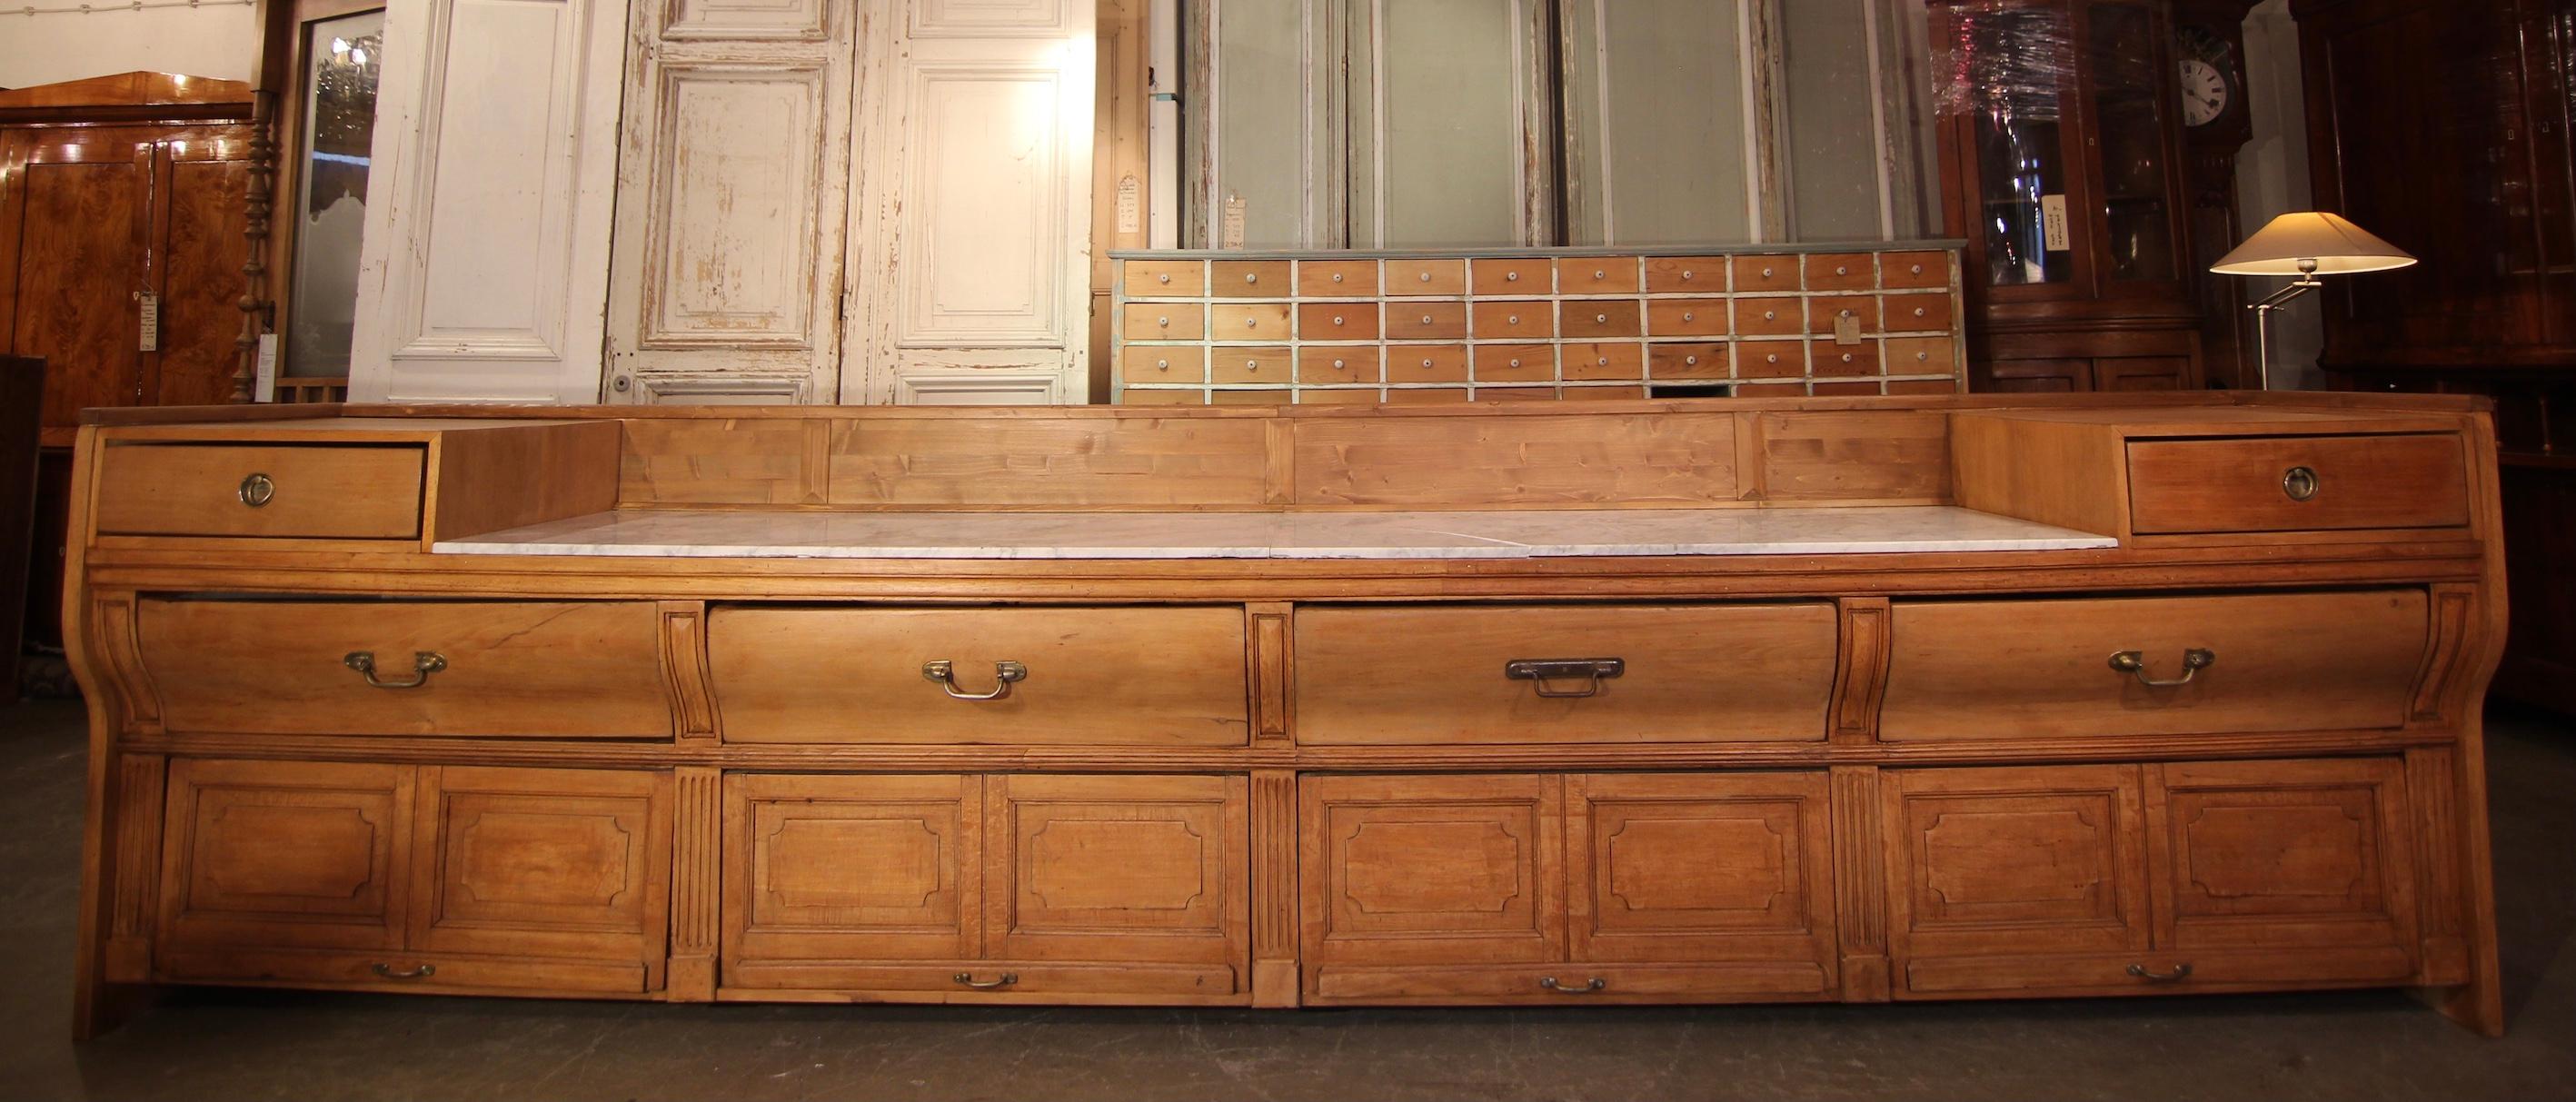 Elegant huge French boulangerie counter or goods display sideboard. Originally from the early 20th century with later additions. 

On rectangular ground plan standing long half-height beech wood corpus with Carrara marble top.

Vertically curved